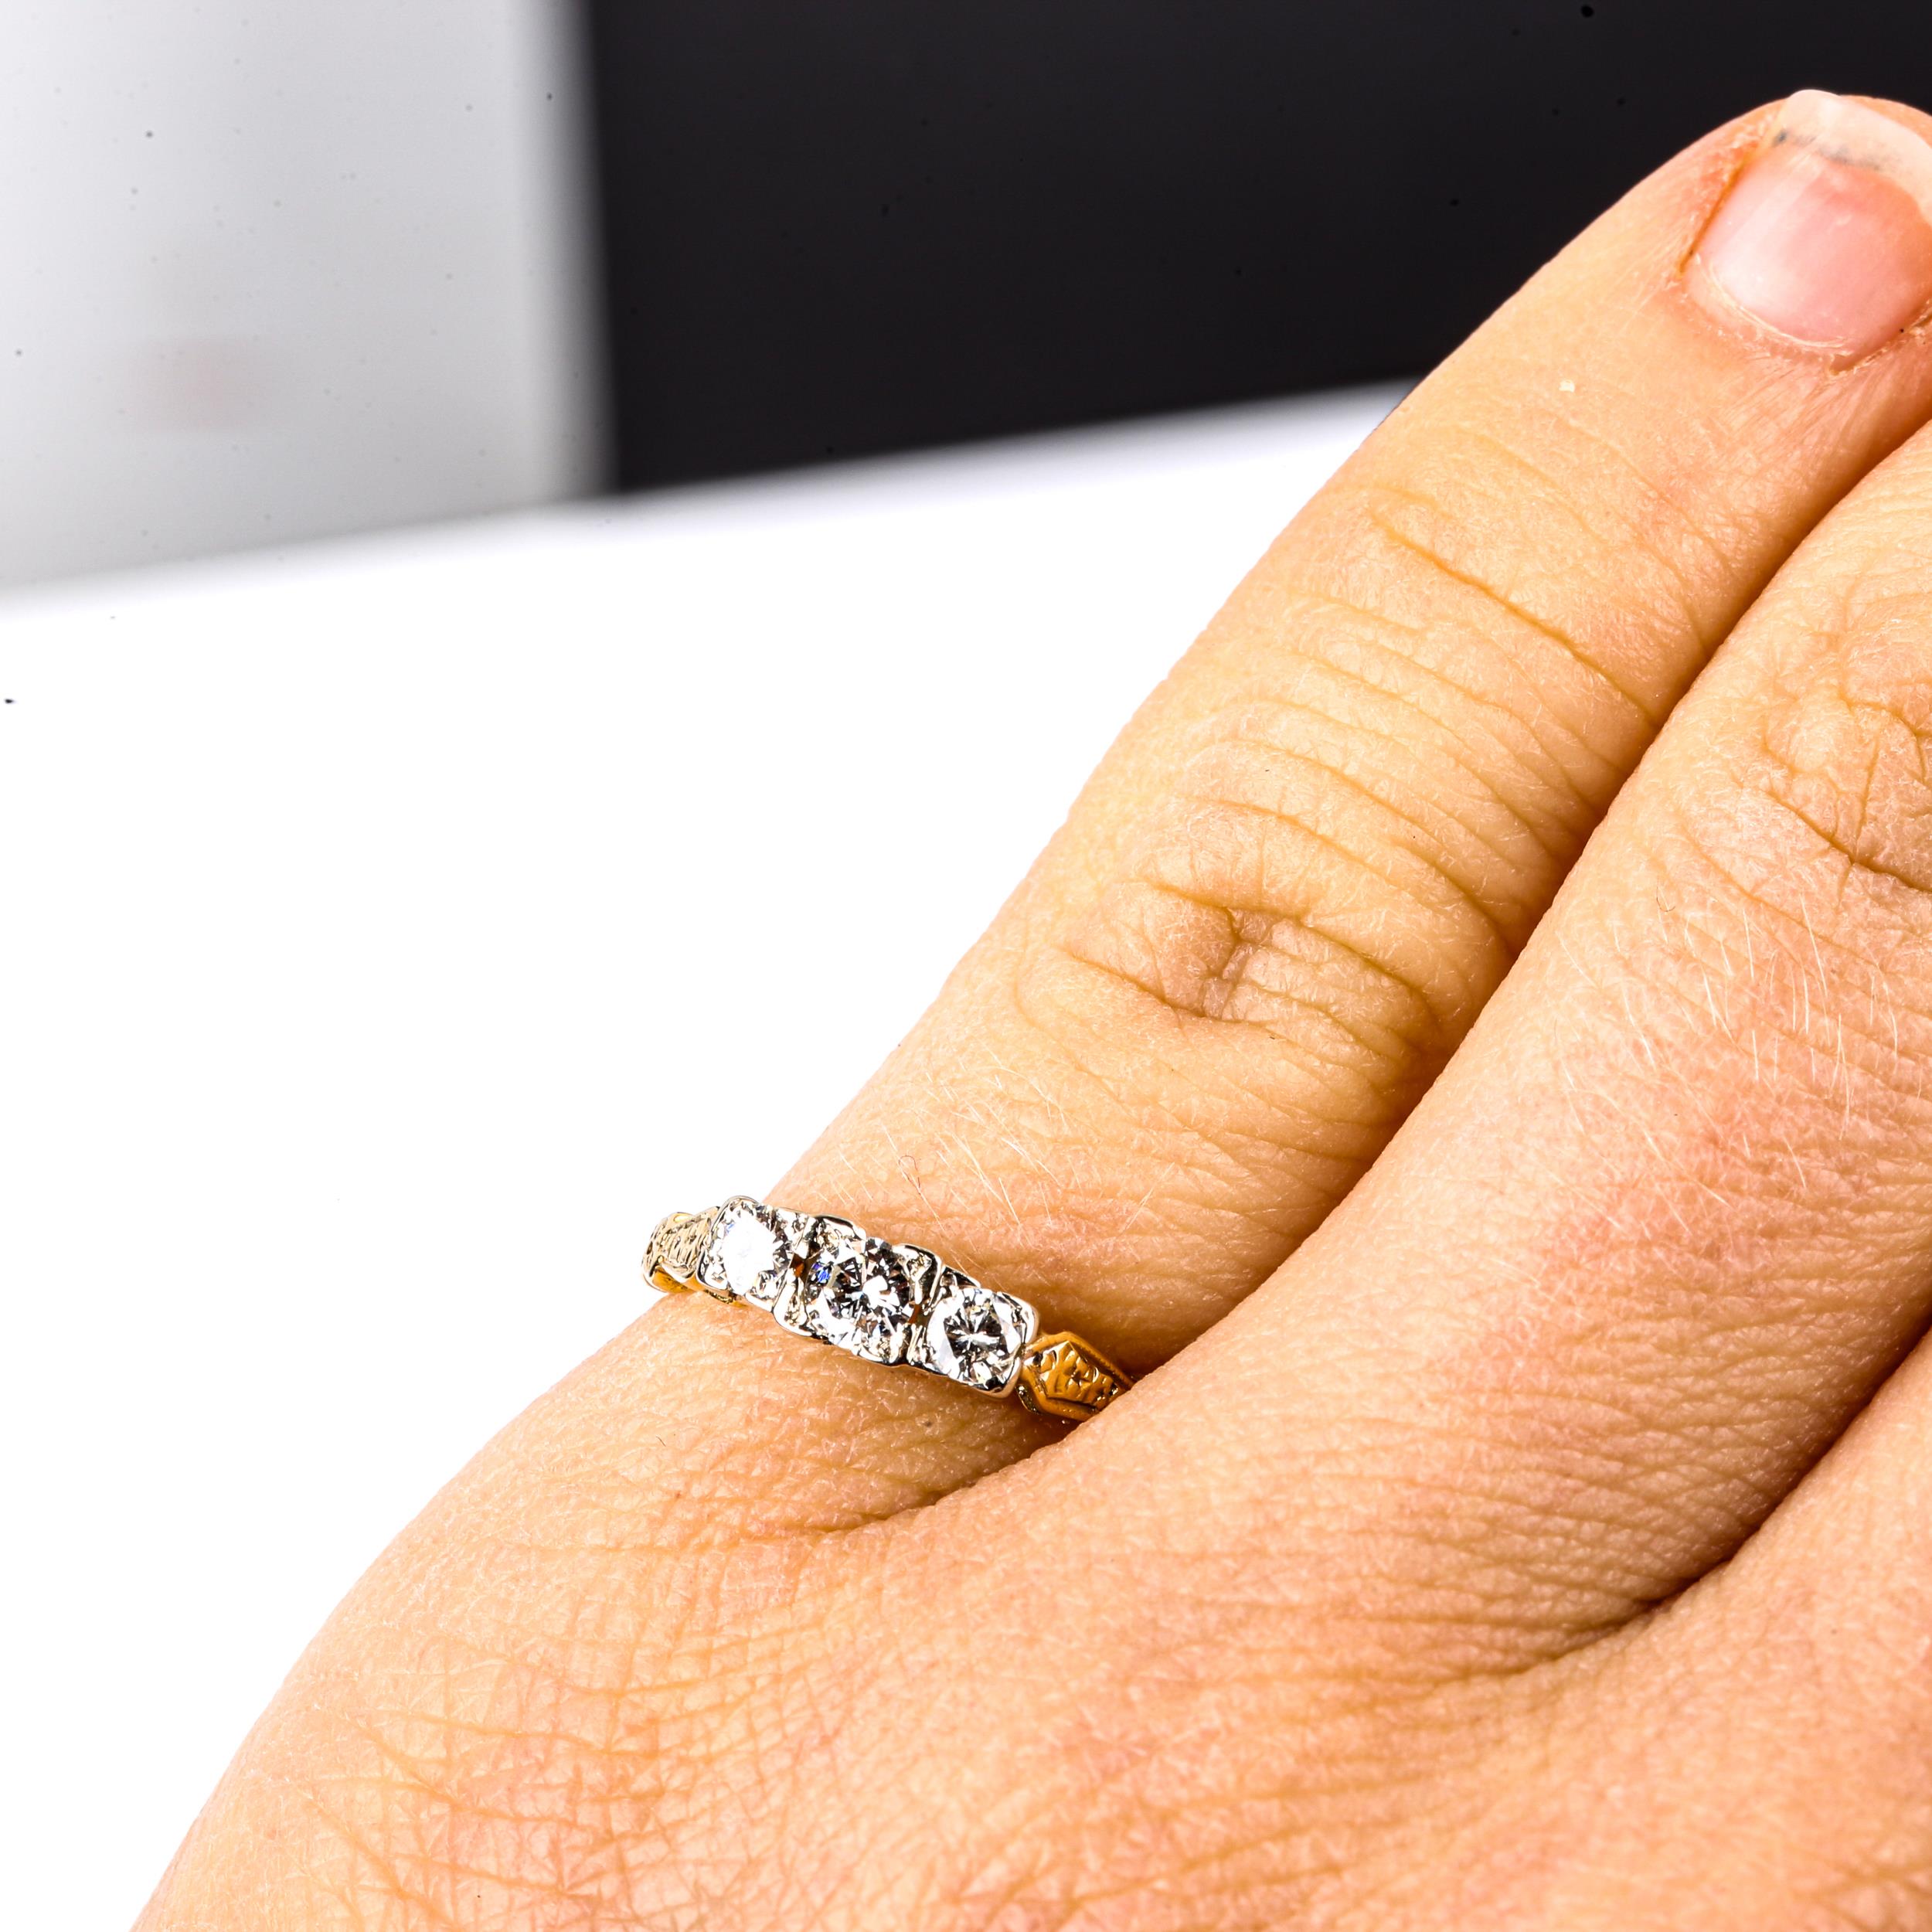 An 18ct gold 3-stone diamond ring, platinum-topped set with modern round brilliant-cut diamonds, - Image 4 of 4